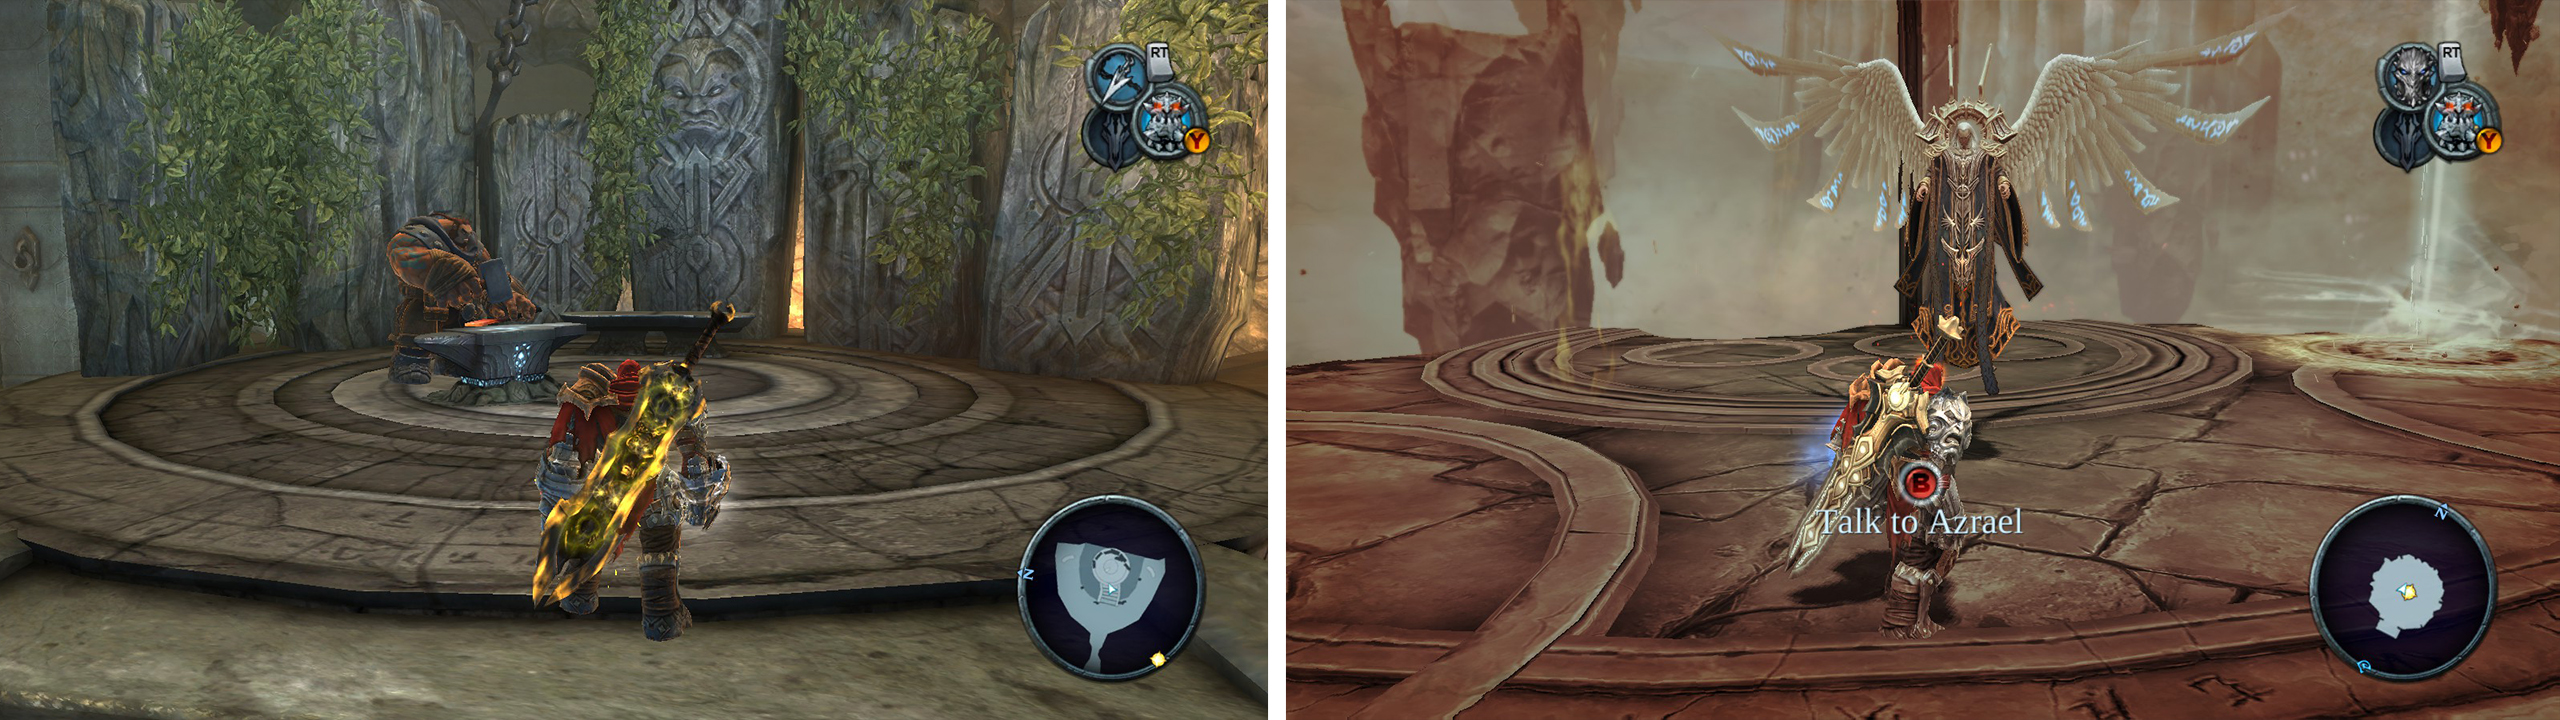 Take the Armageddon Blade Shards to Ulthane (left) and then speak with Azrael in Leviathans Drift (right).